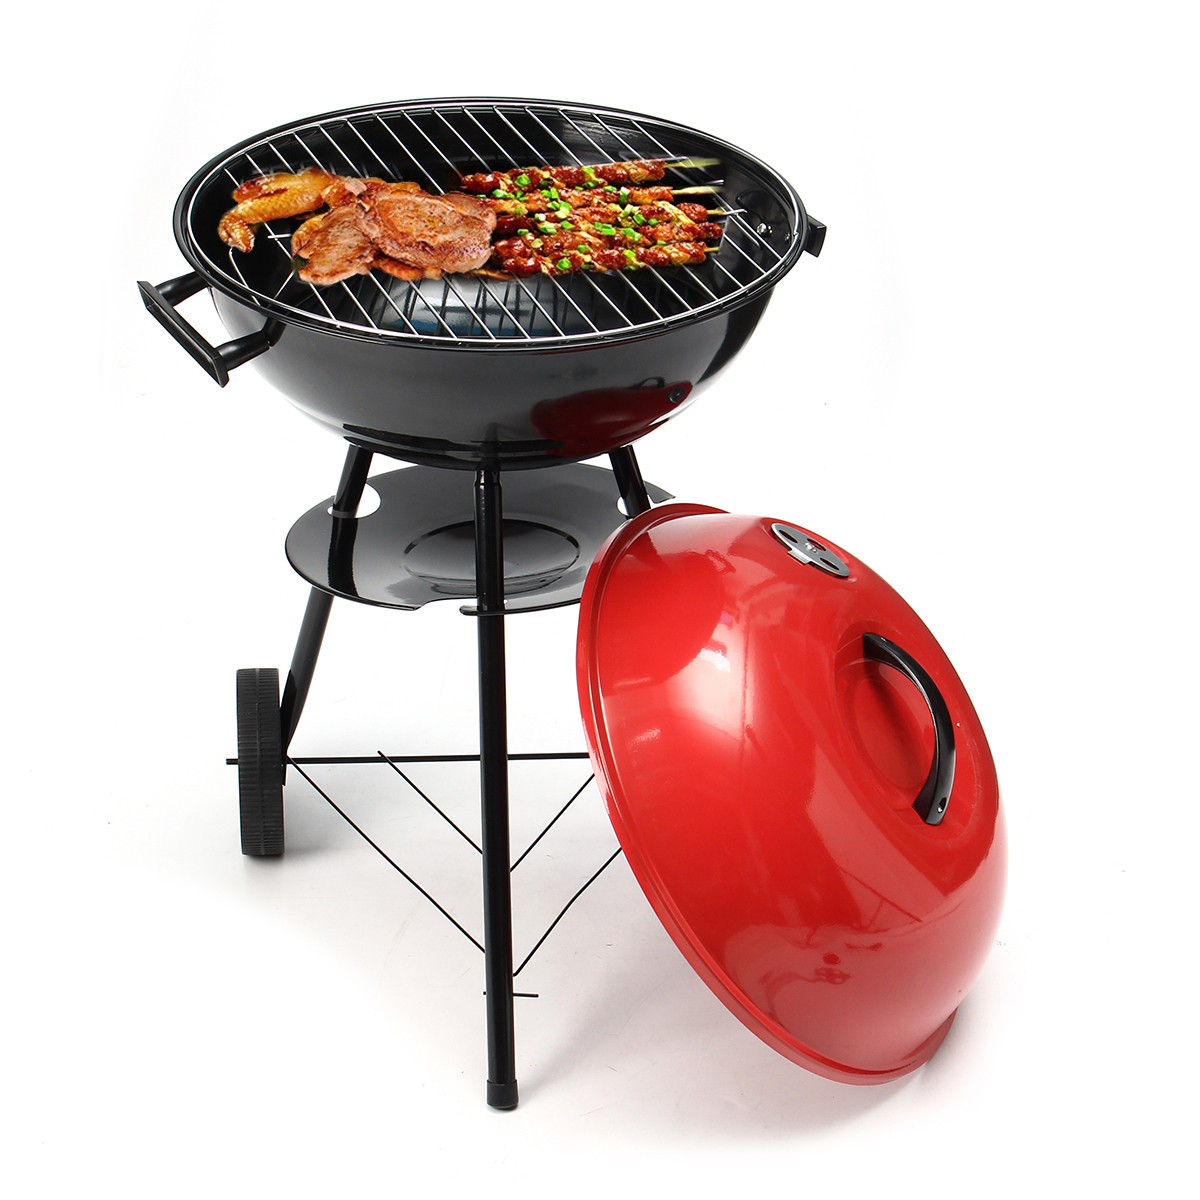 

Portable Red Kettle Trolley BBQ Grill Charcoal Barbecue Wood Barbeque Picnic BBQ Grill